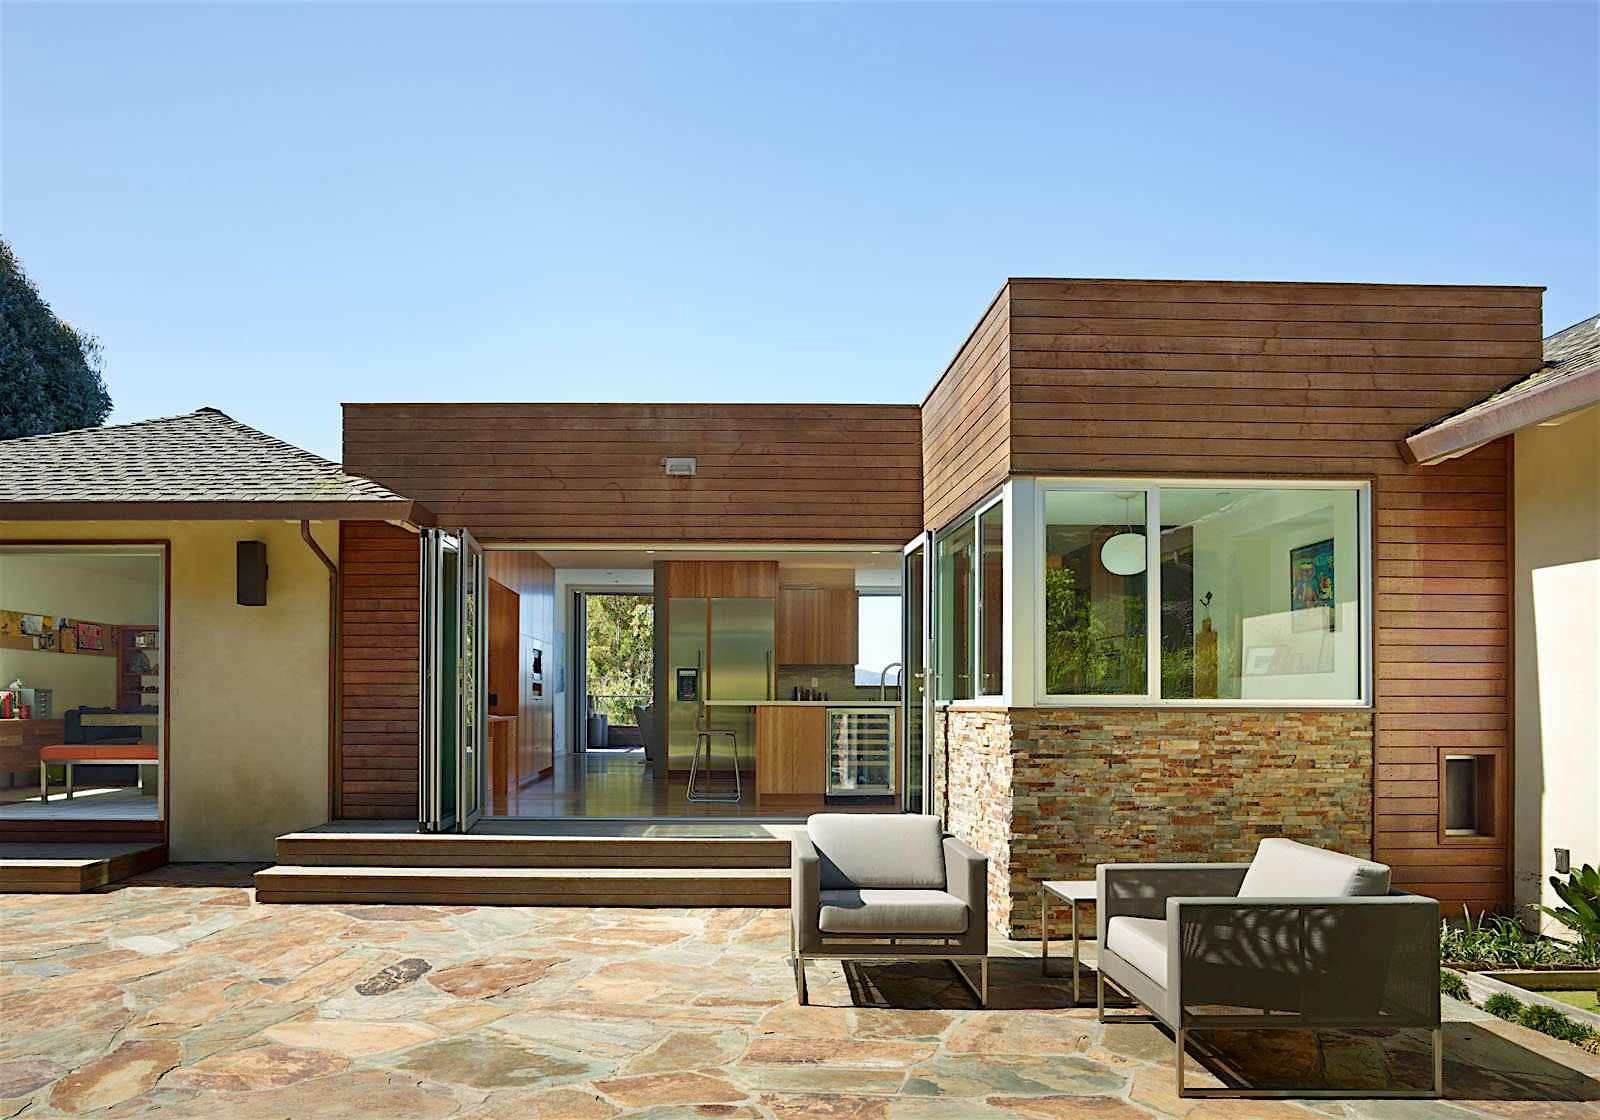 Mid-Century-Modern-exterior-with-NanaWall-glass-wall-system-connecting-kitchen-to-outdoor-patio